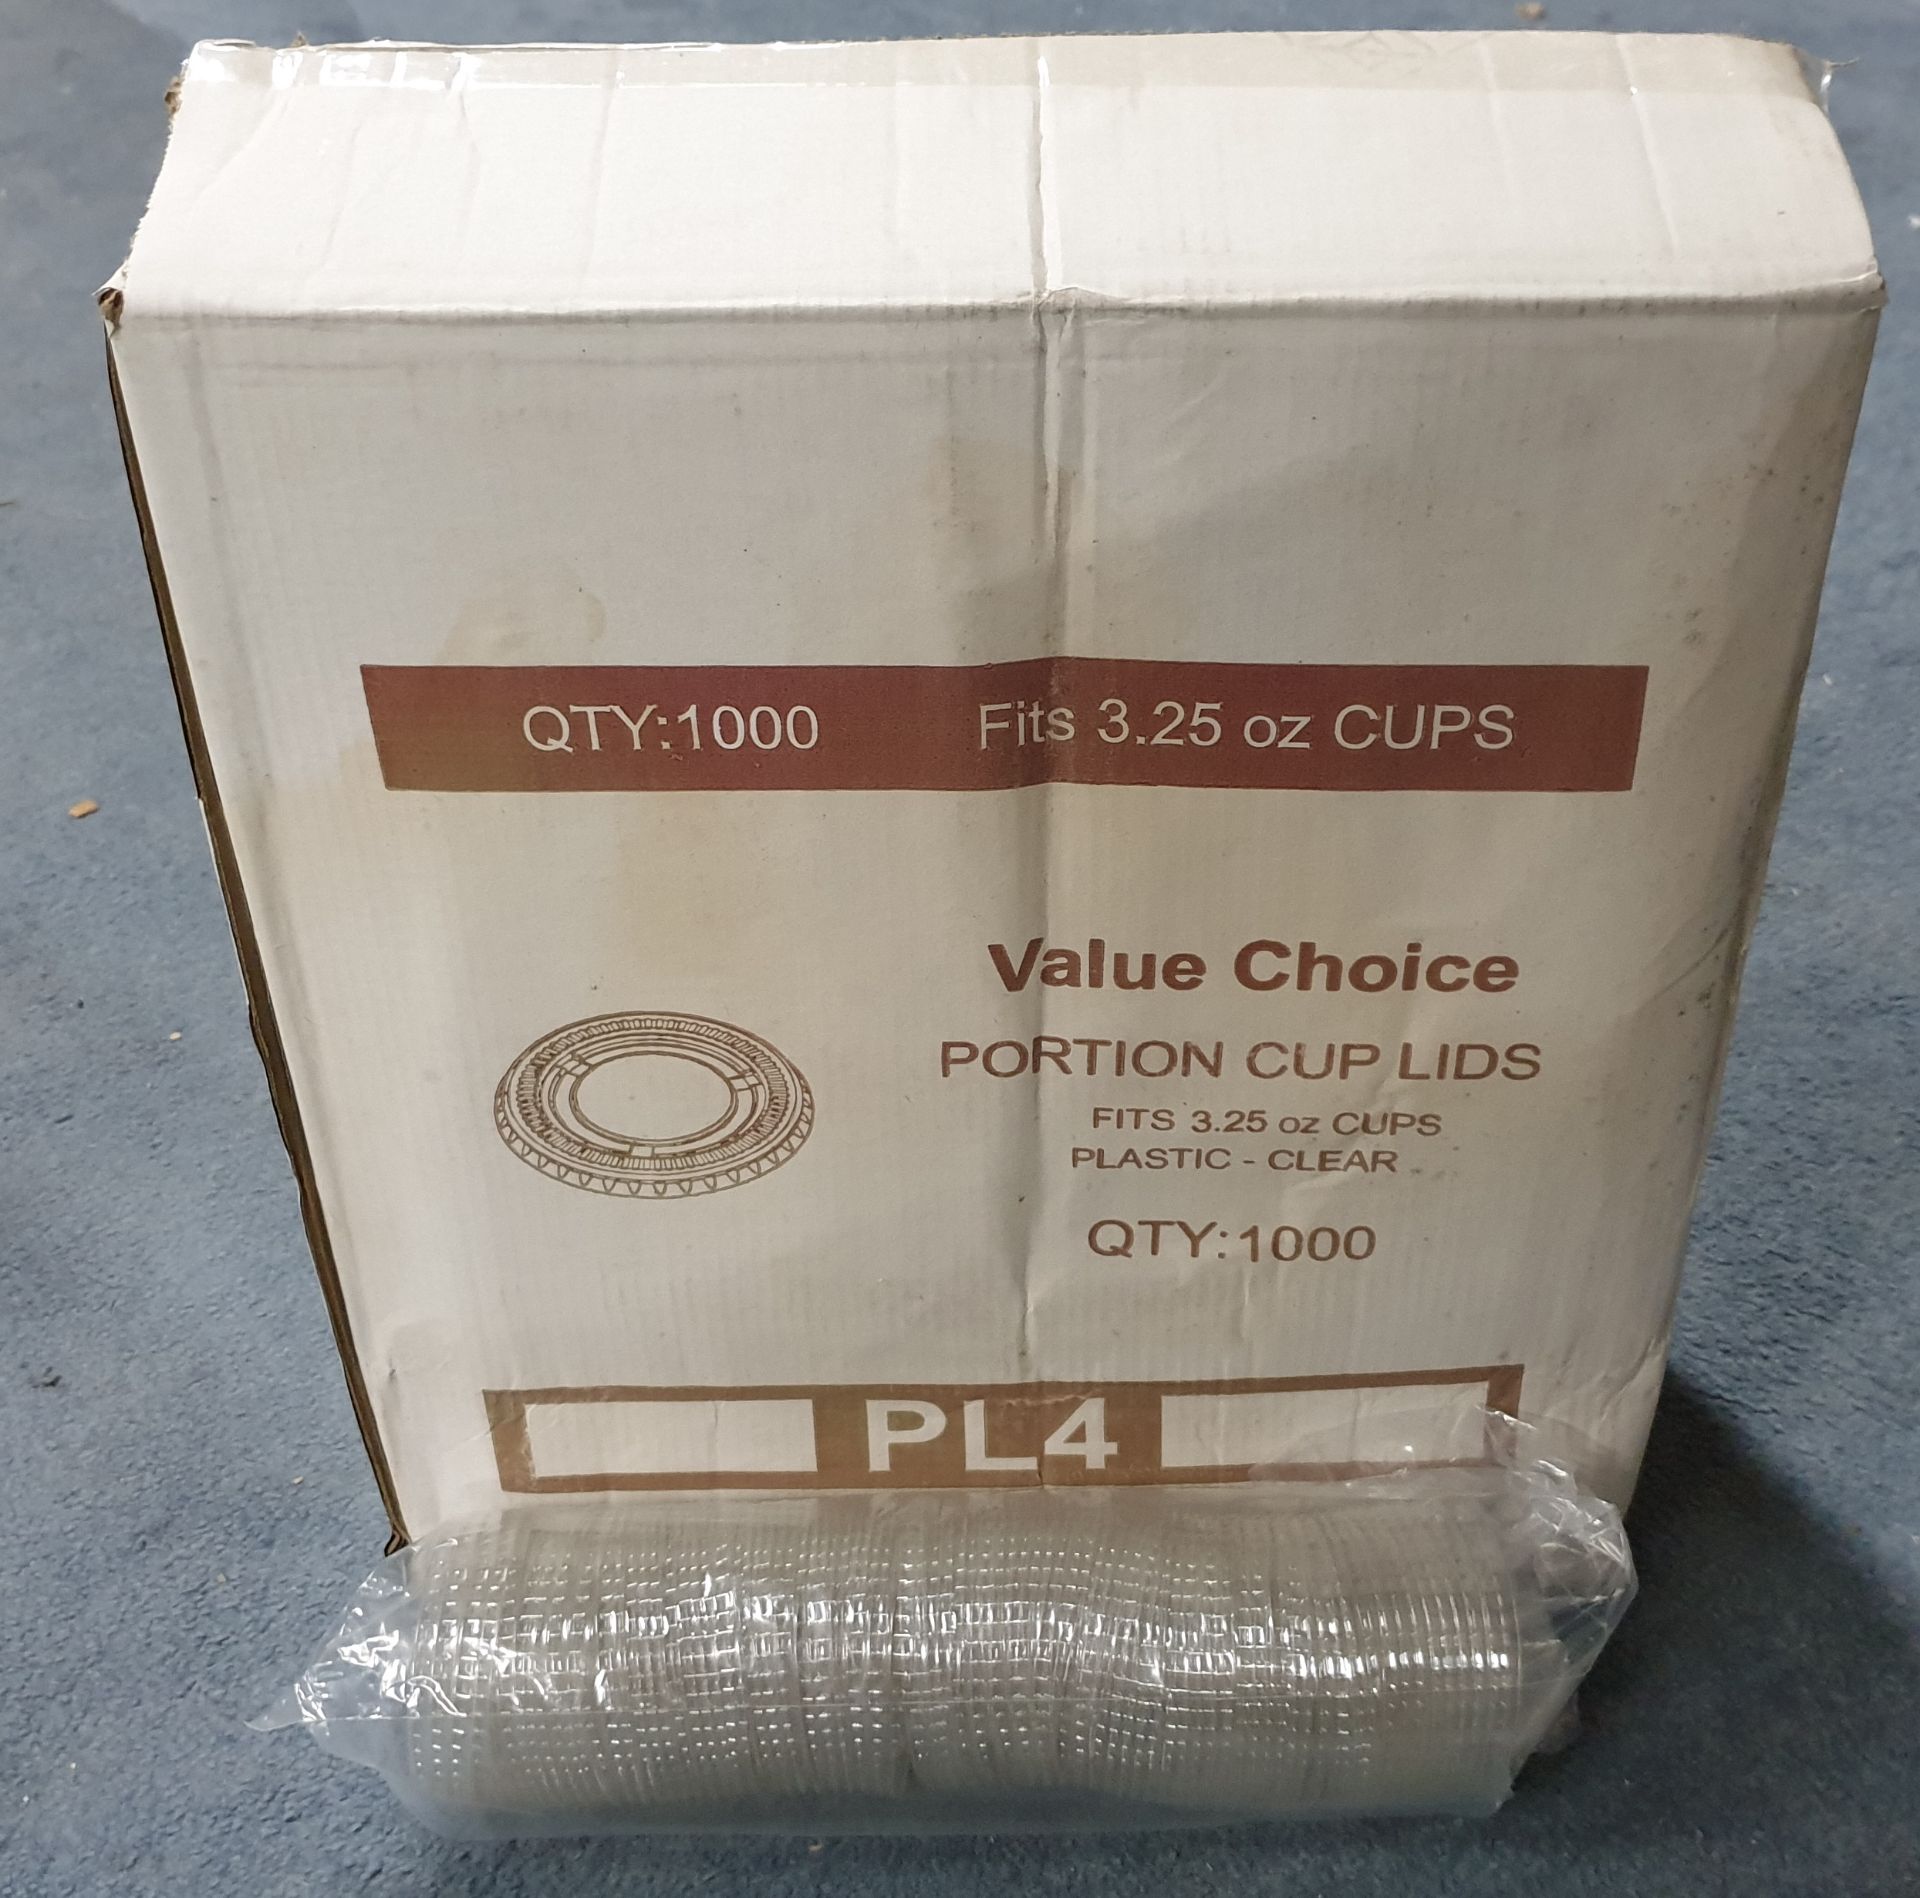 1 x Box of Portion Cups/Lids by Value Choice - Image 2 of 2